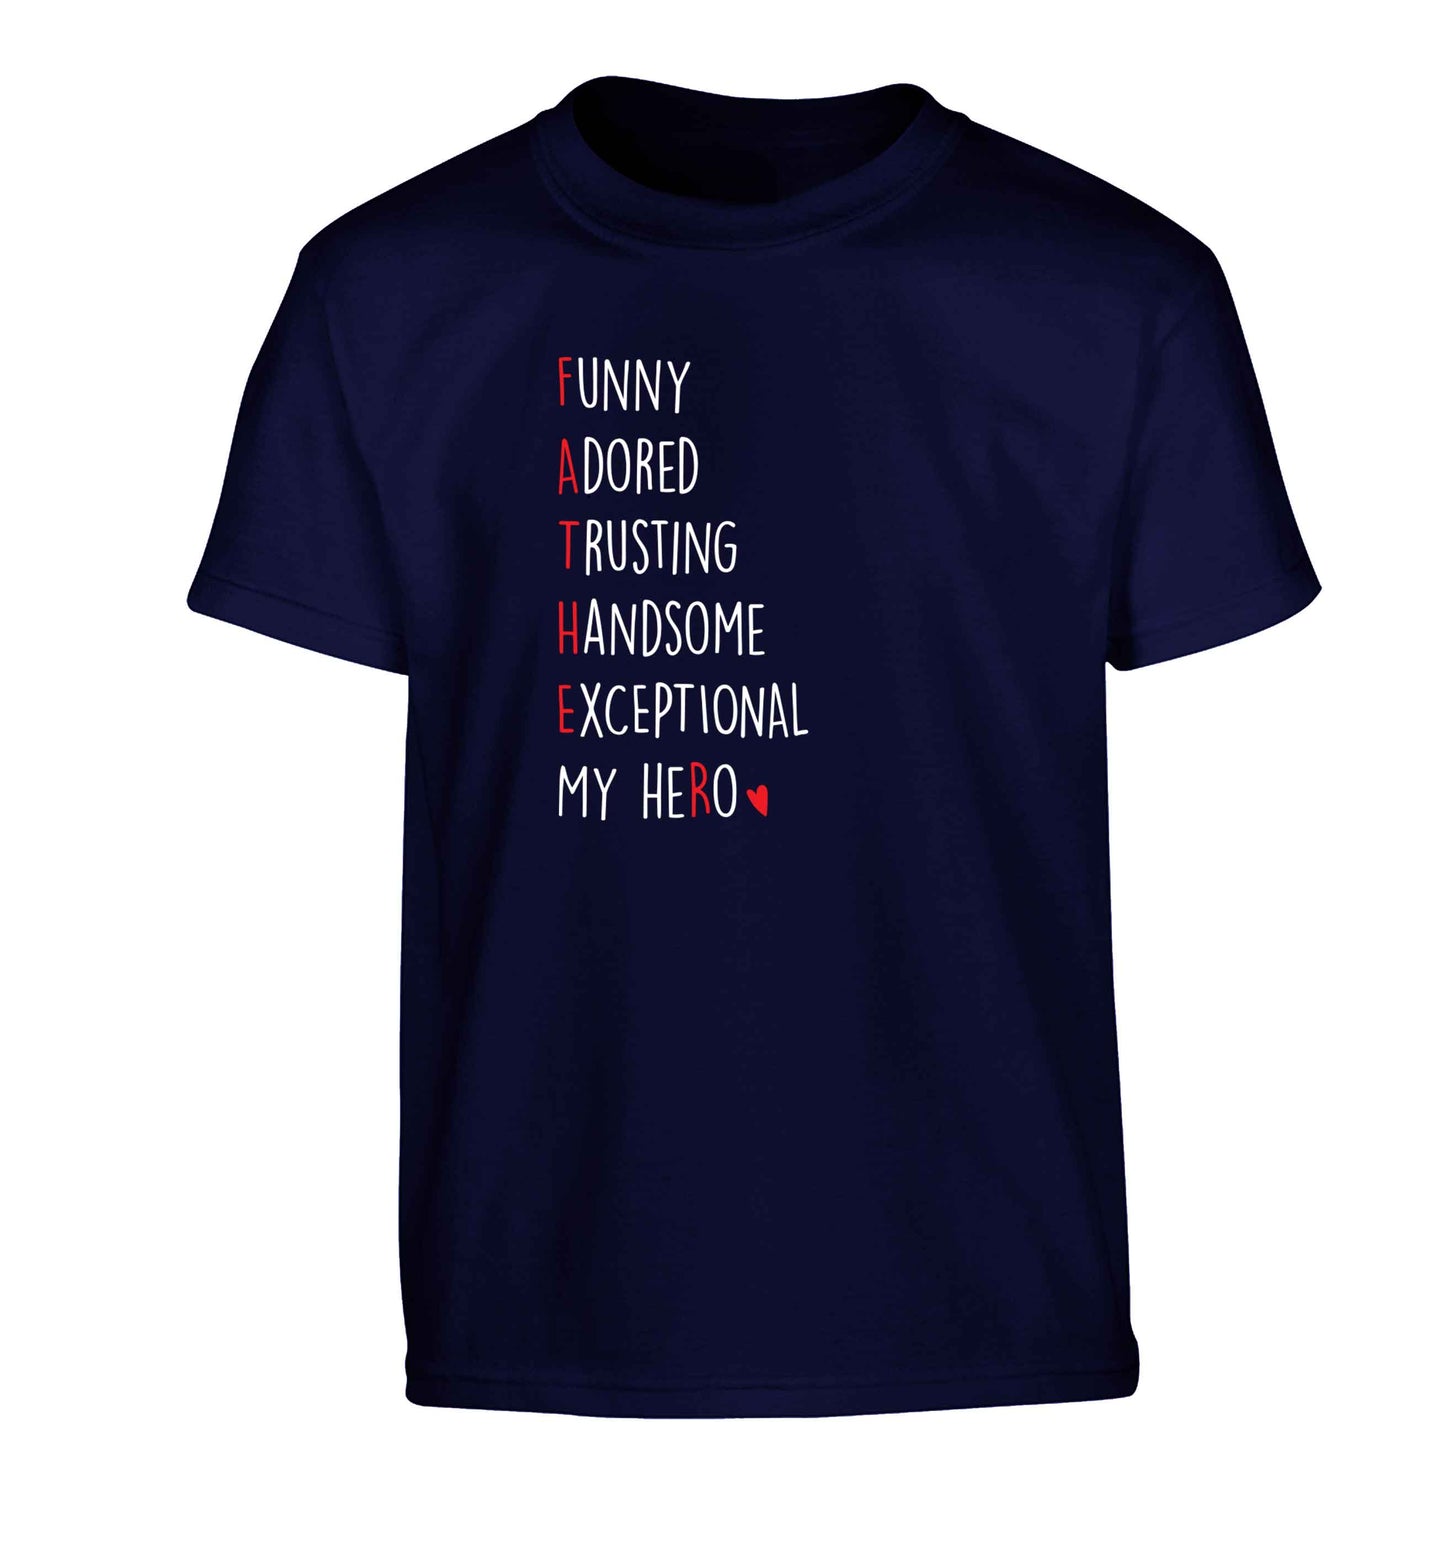 Father, funny adored trusting handsome exceptional my hero Children's navy Tshirt 12-13 Years